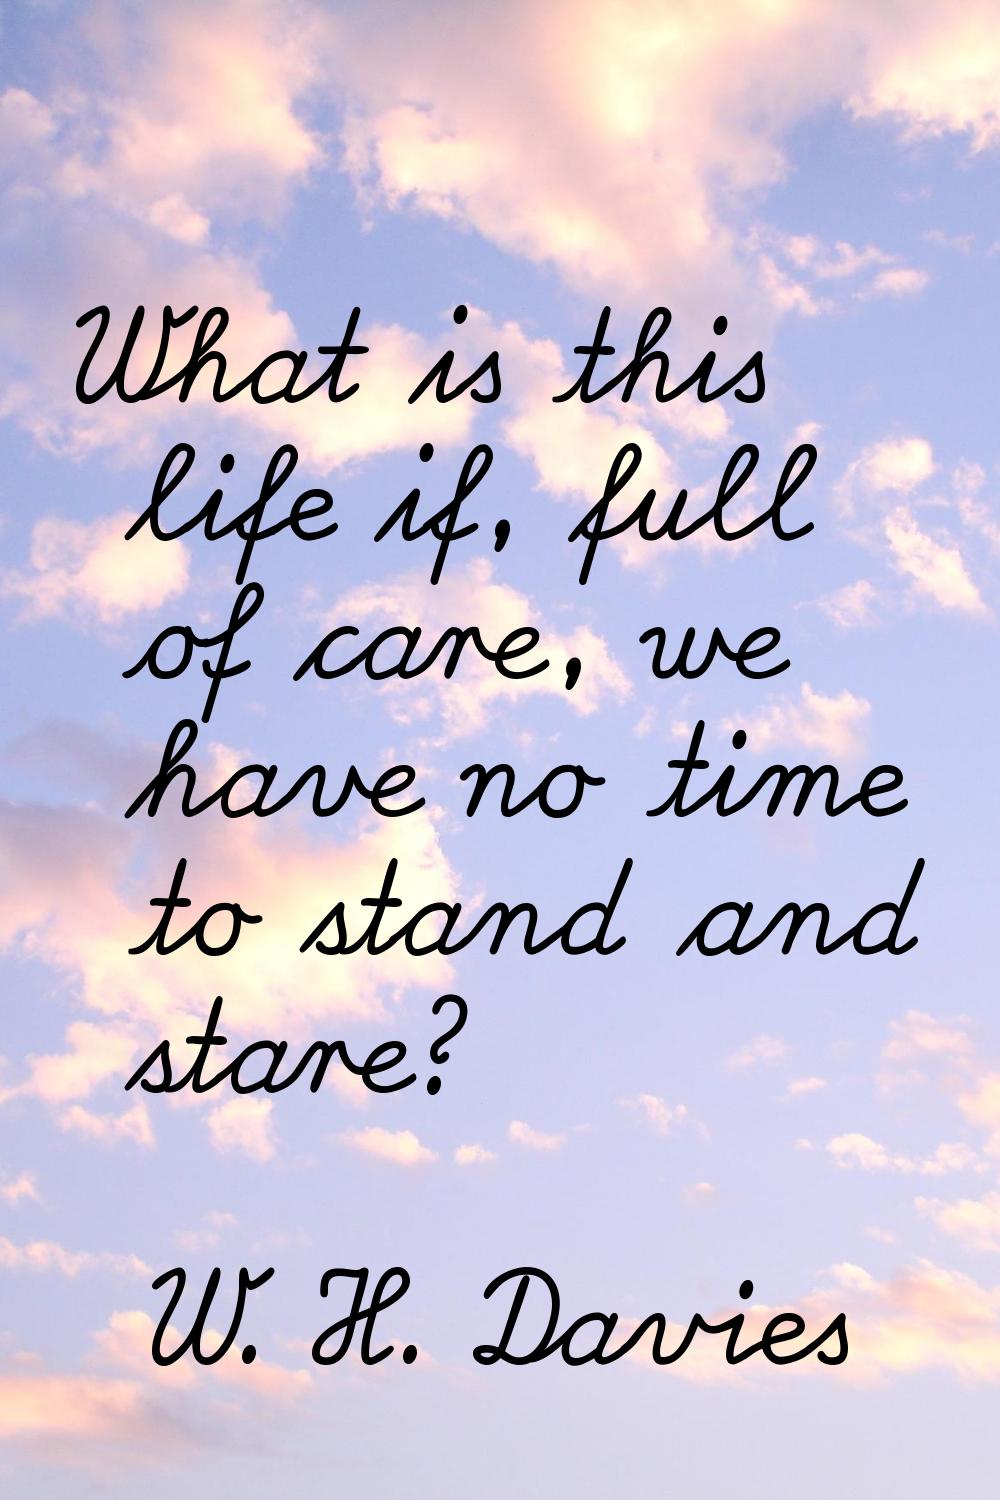 What is this life if, full of care, we have no time to stand and stare?